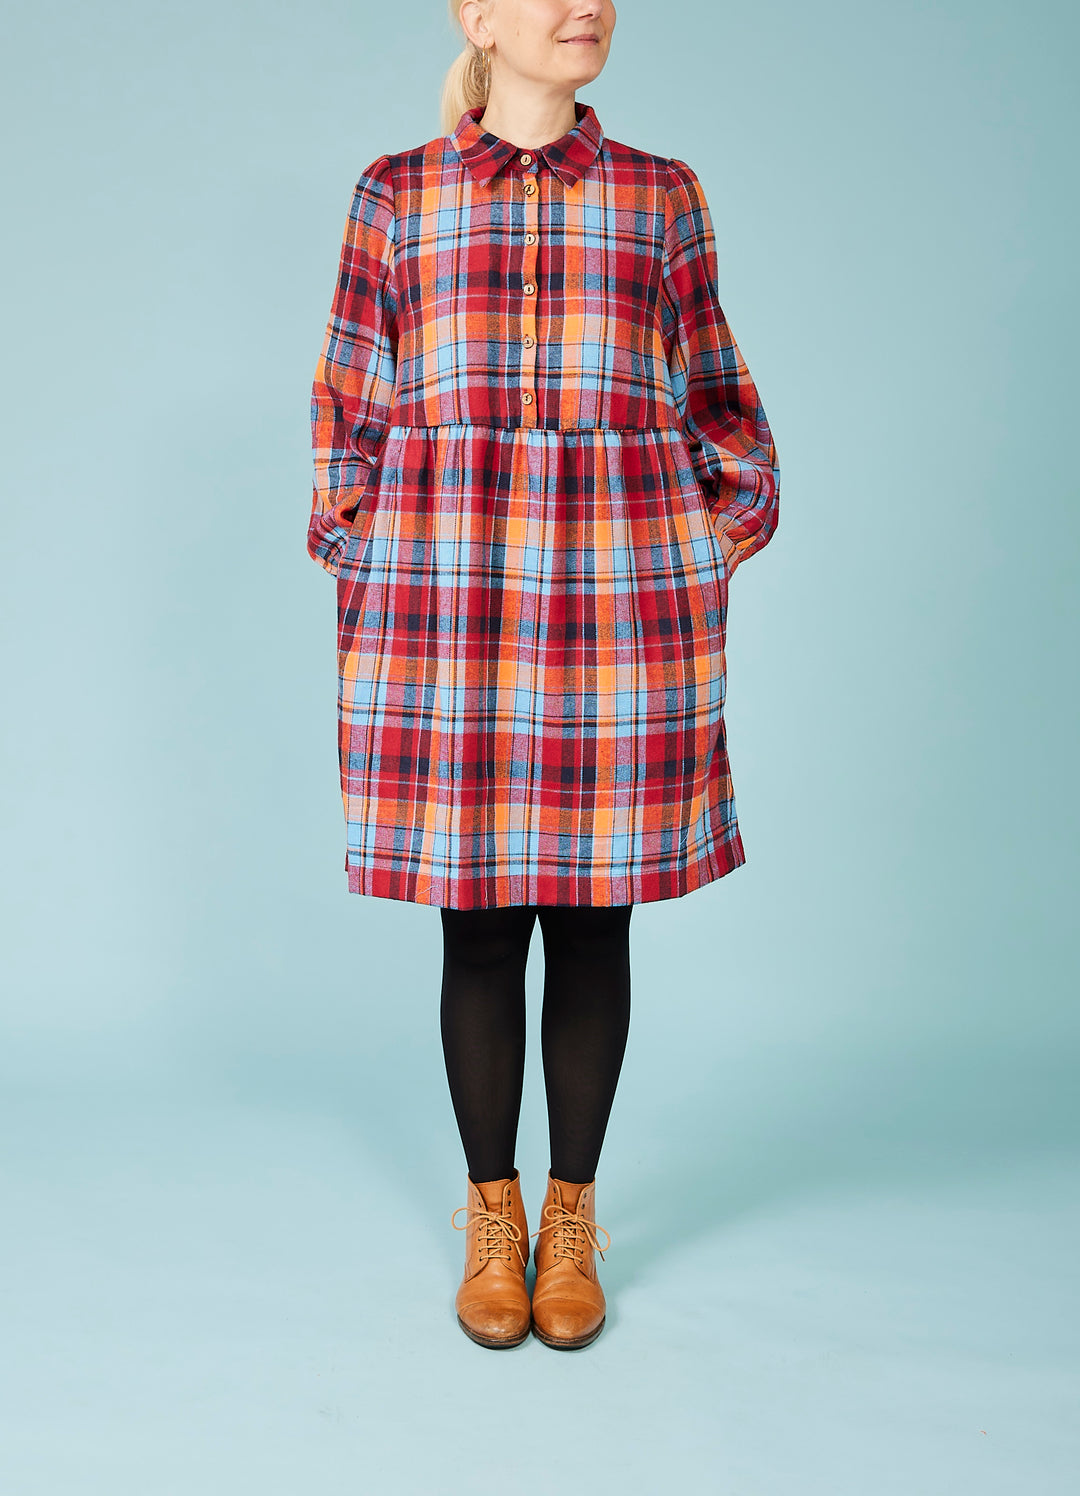 Melly throw-on mini dress - checkered flannel